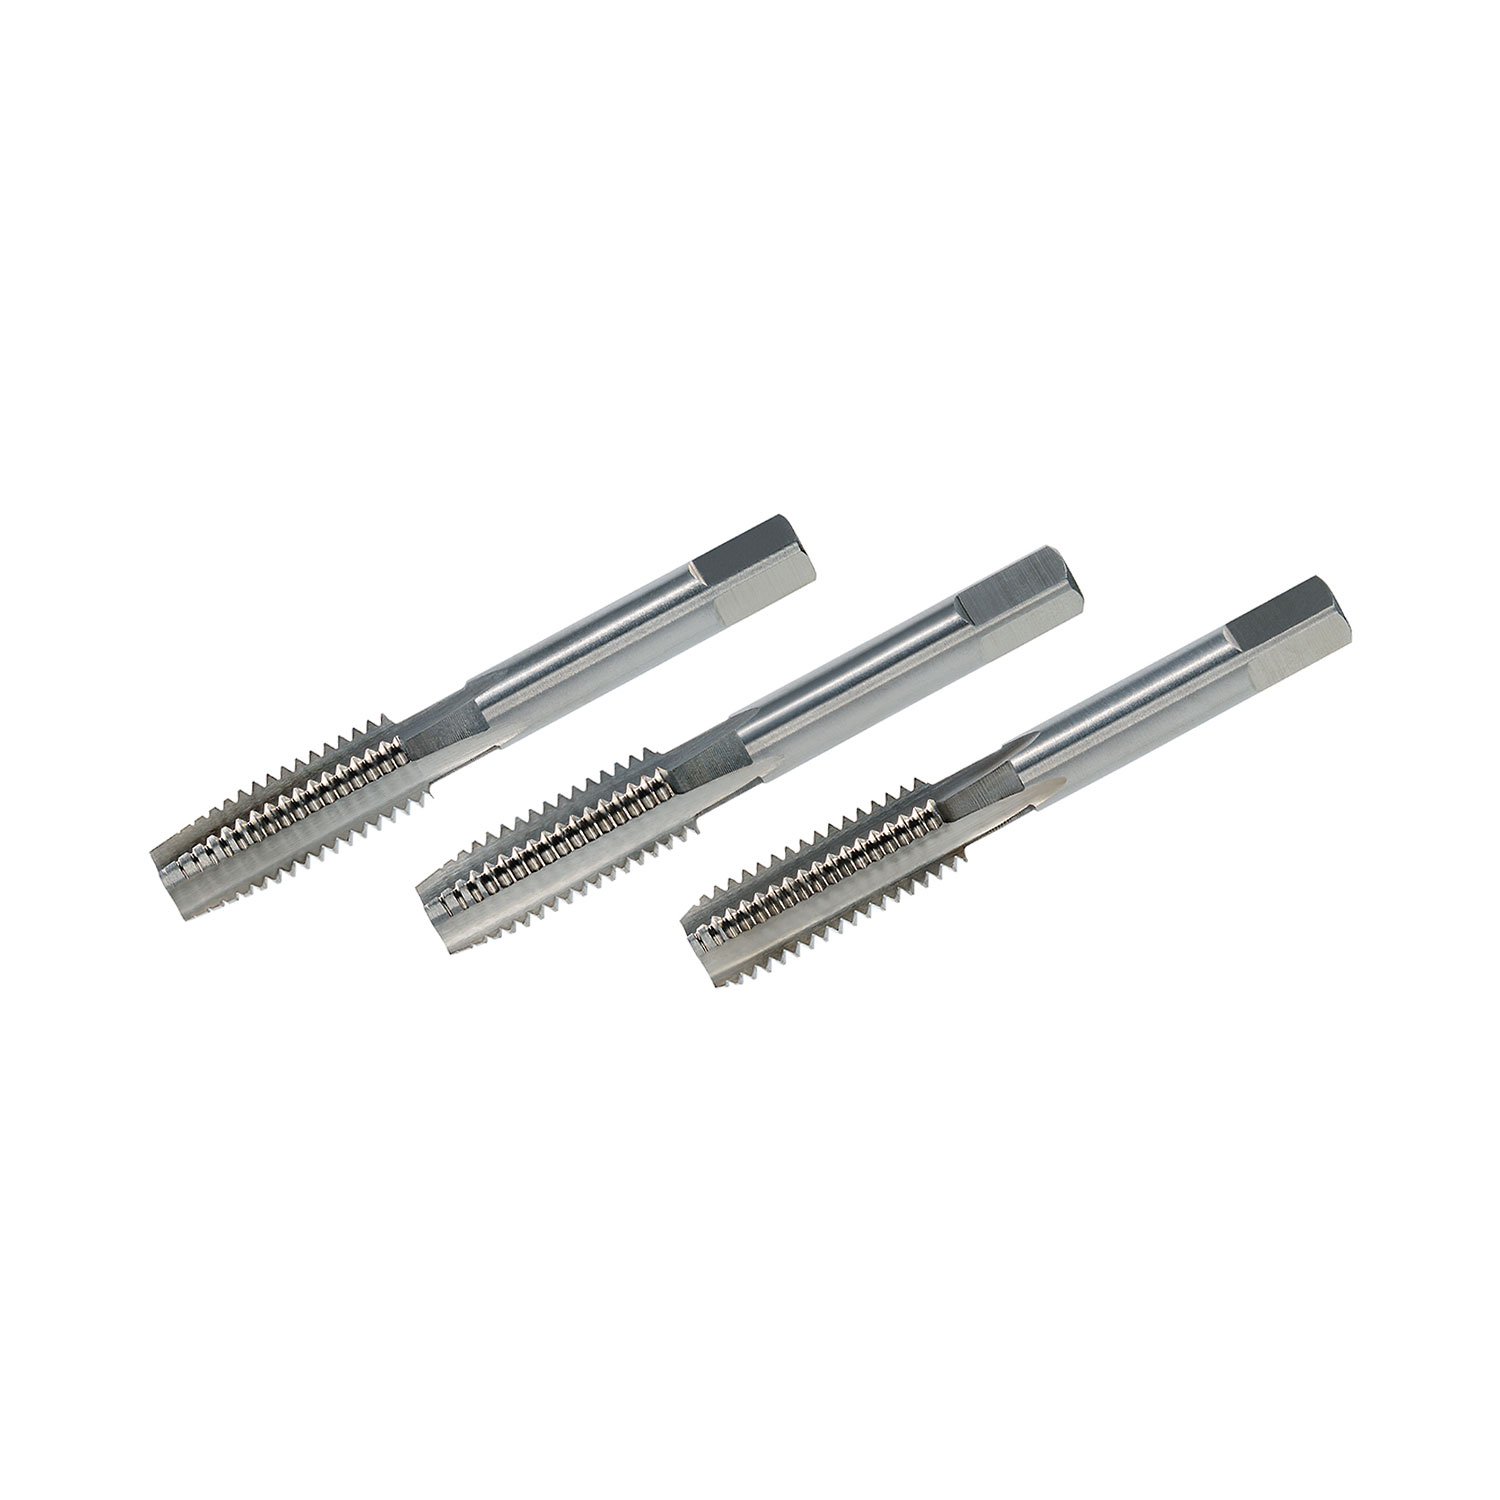 Hand Tap set of 3 pieces DIN 352 HSS-G non-serial form - M 12 x 1.75